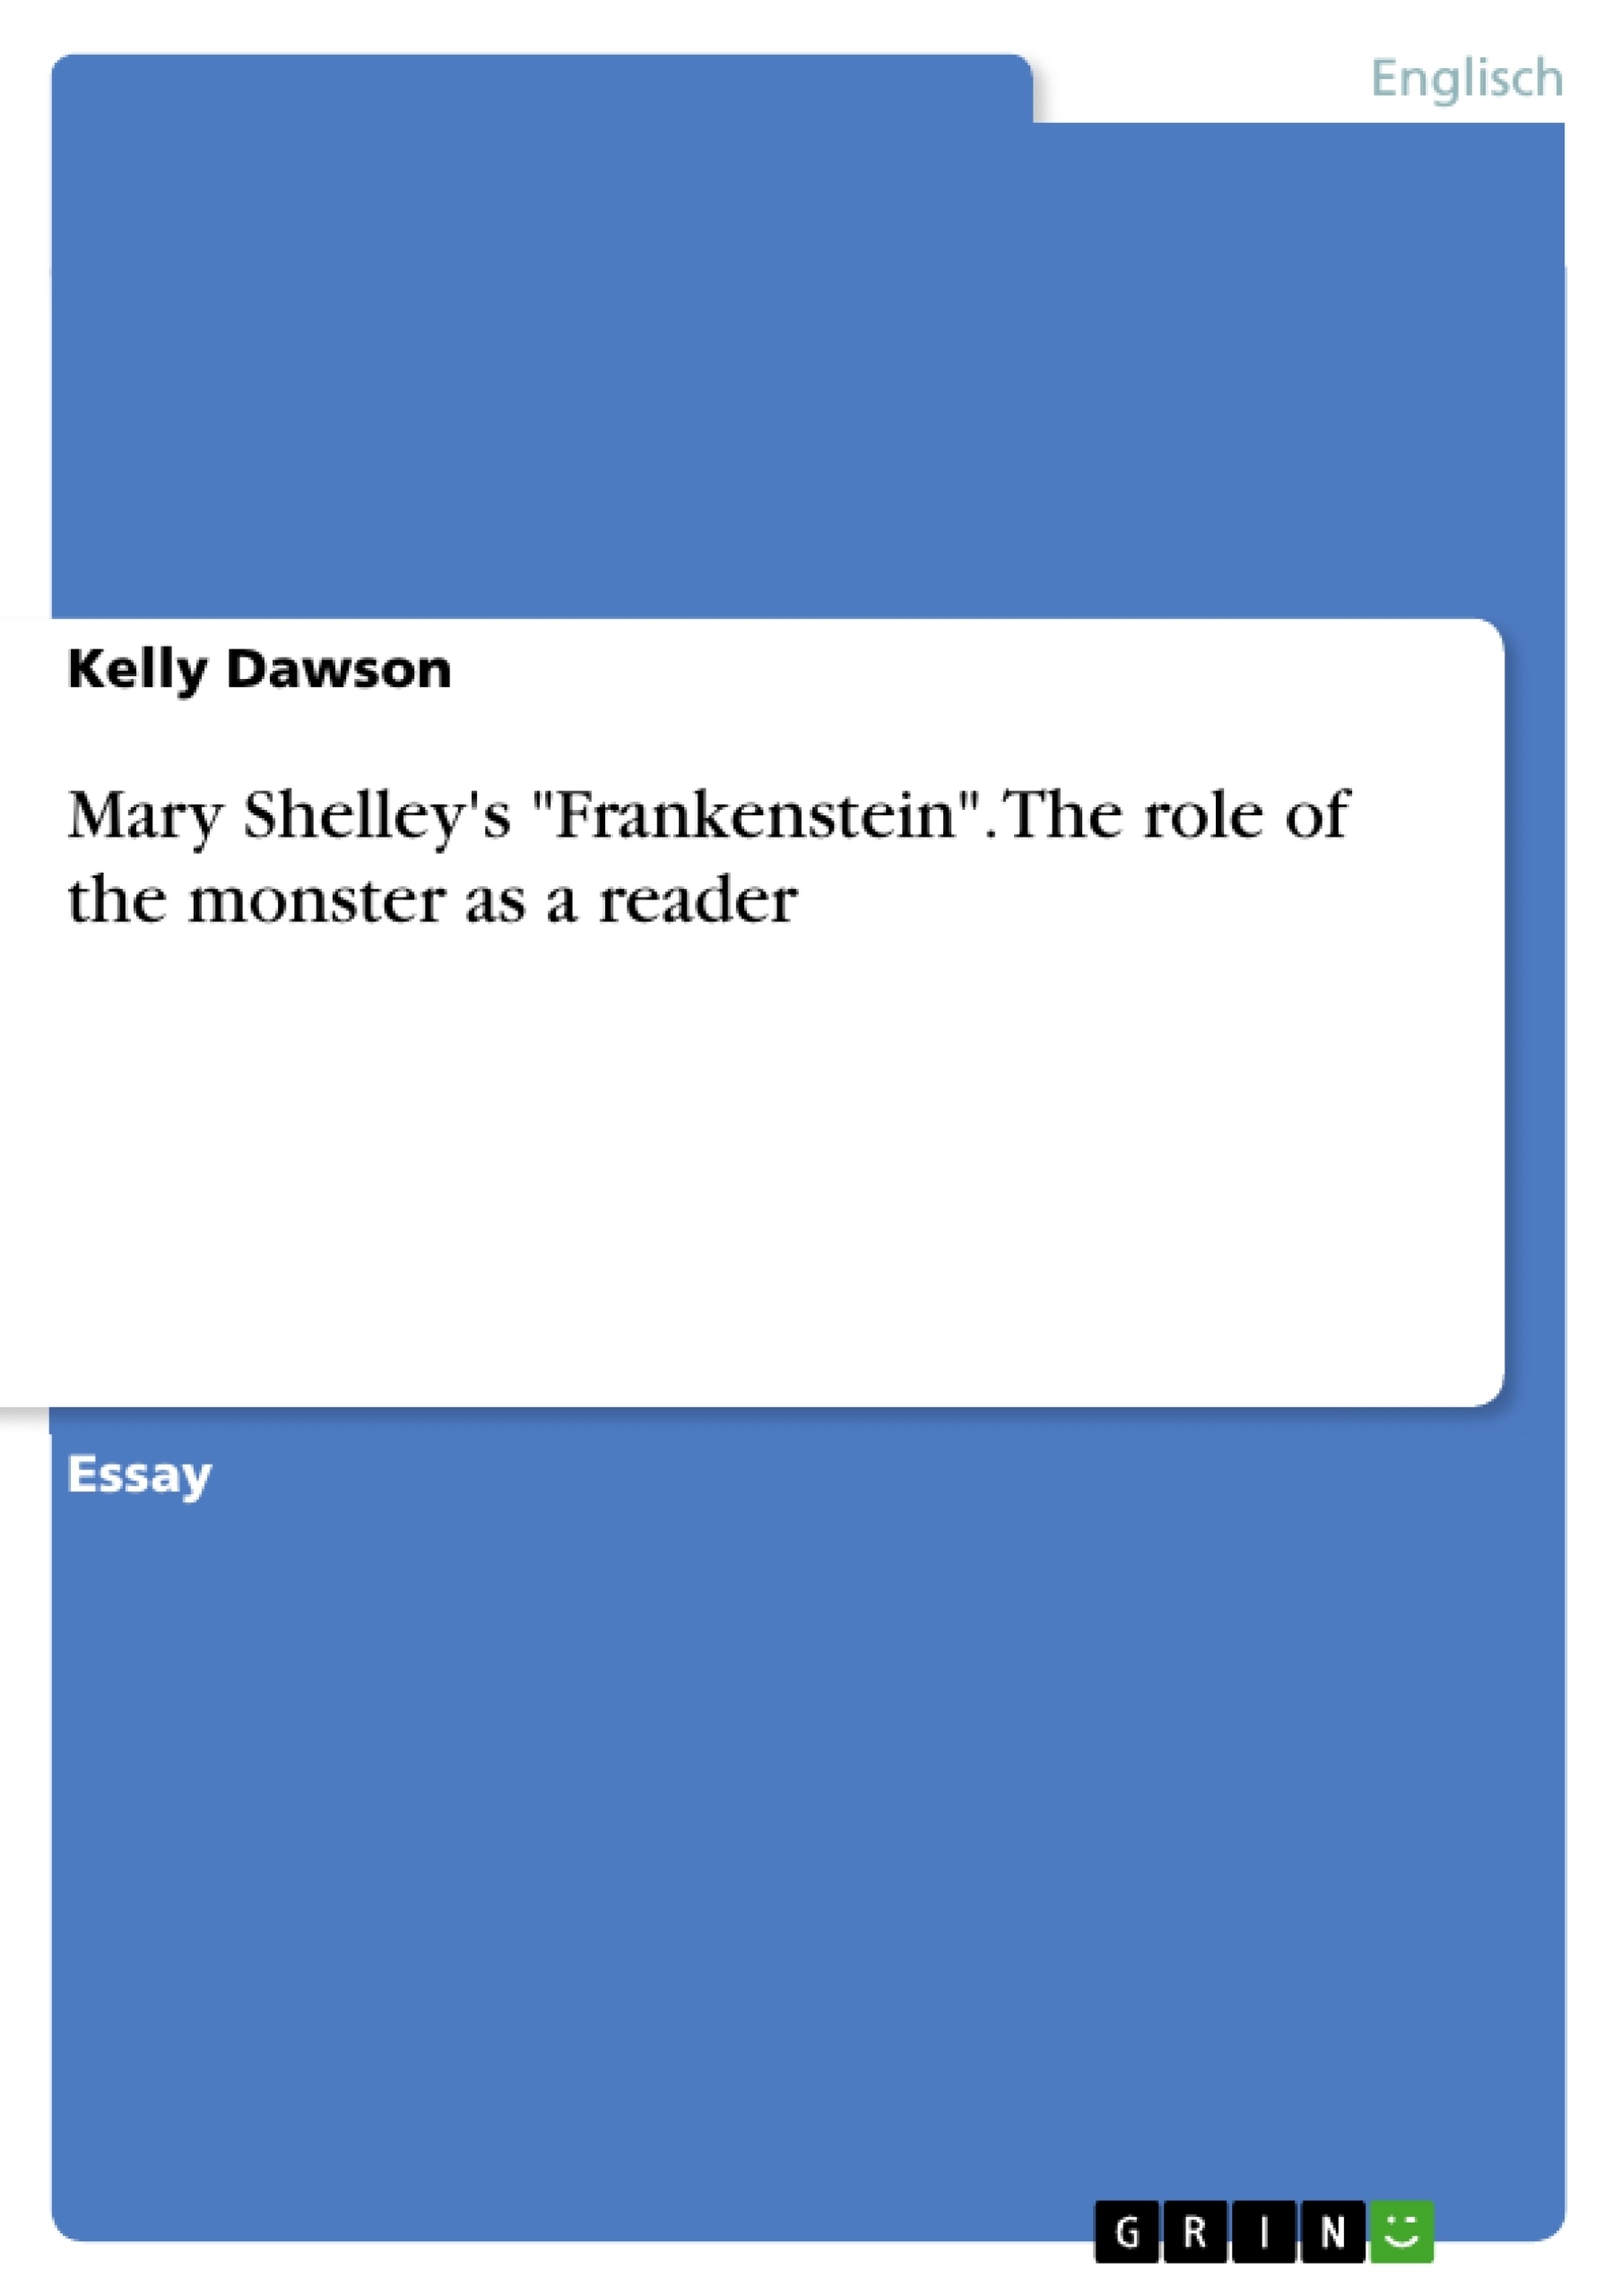 Title: Mary Shelley's "Frankenstein". The role of the monster as a reader